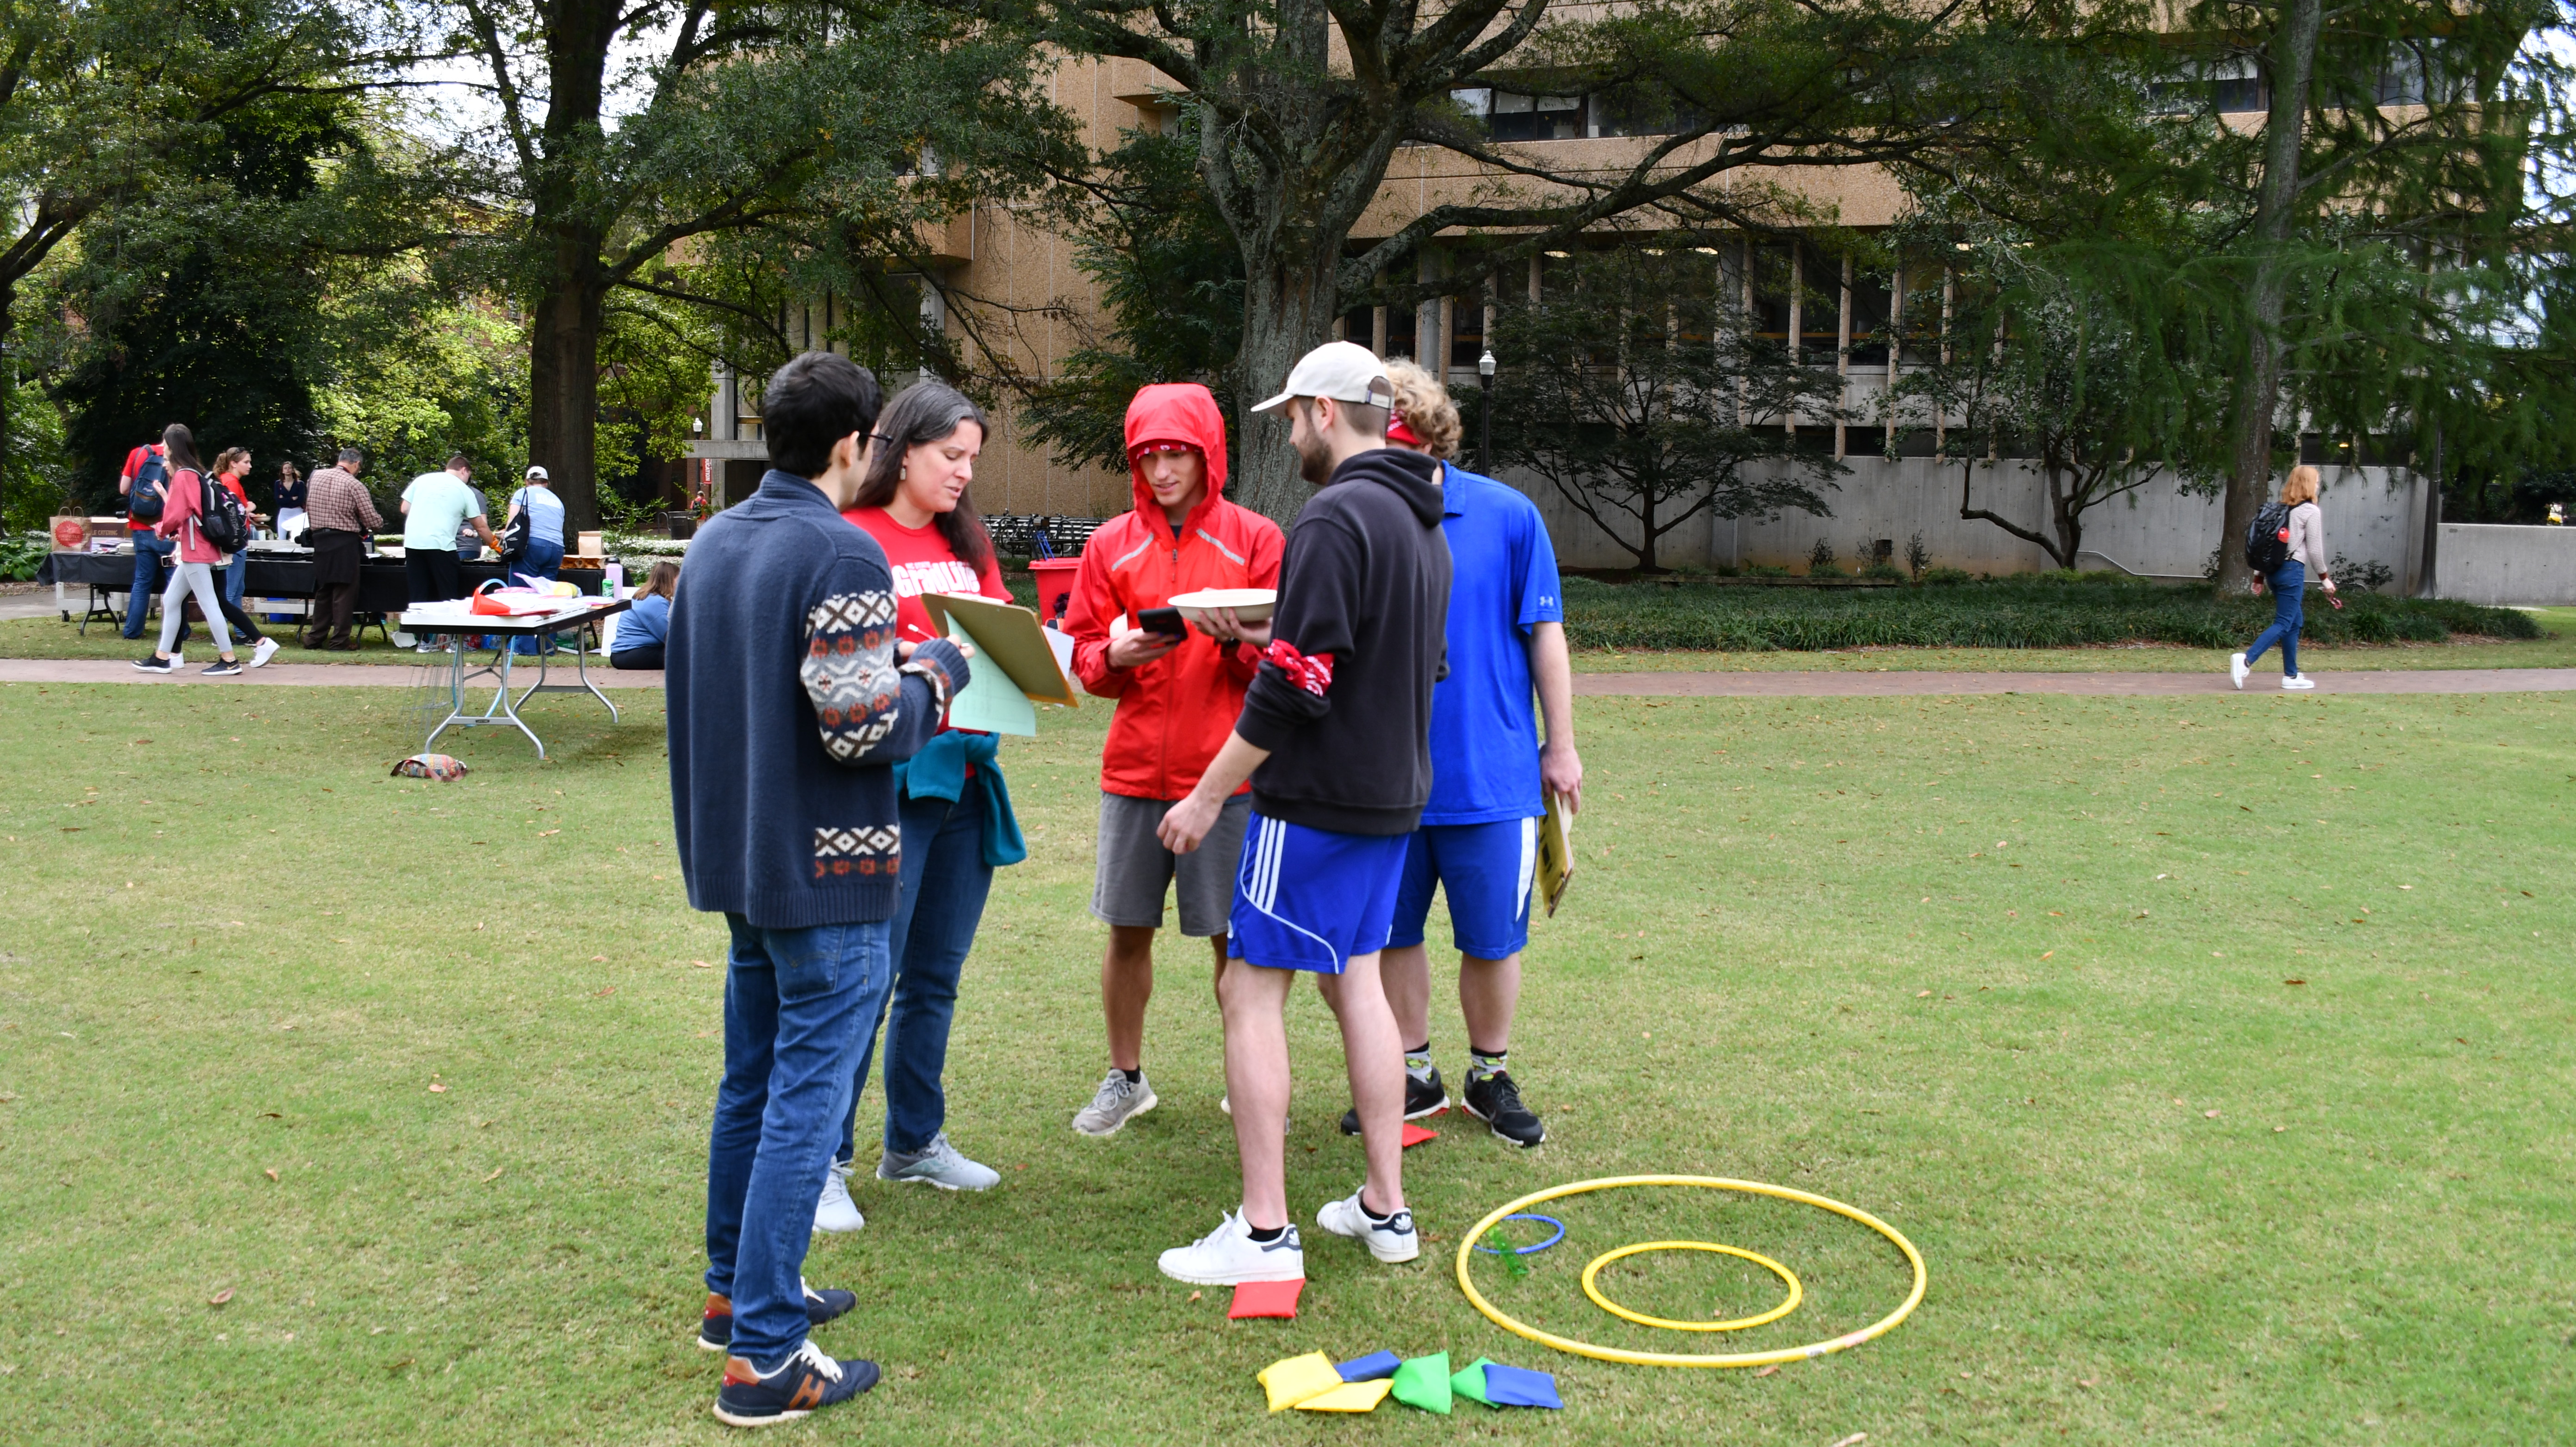 Students check the results of a bean bag toss game at Mathematics Field Day